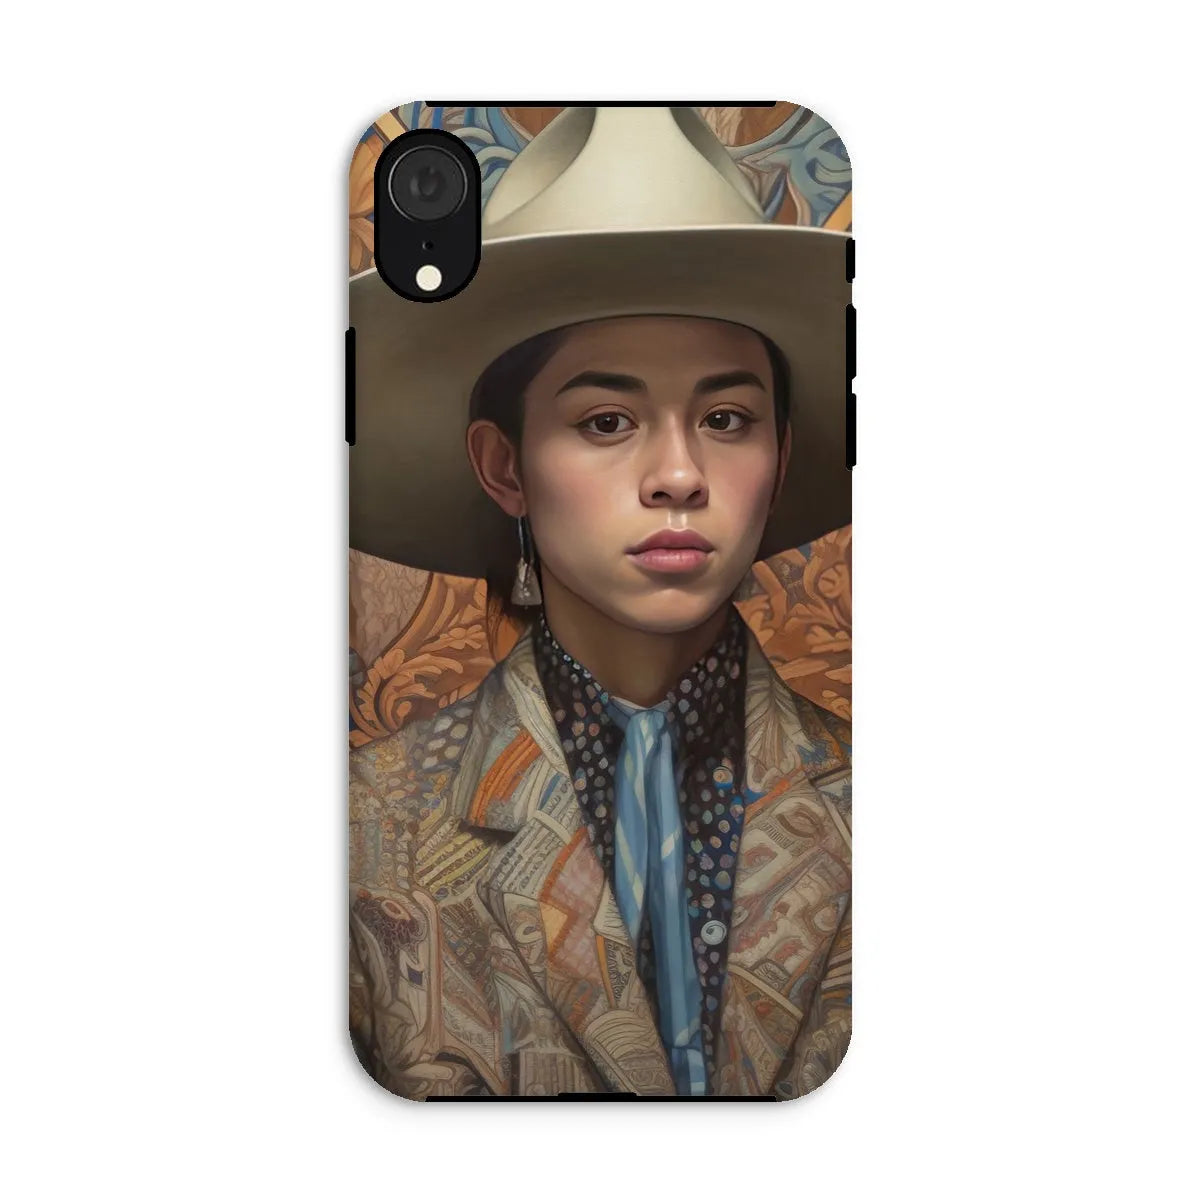 Angel The Transgender Cowboy - F2m Outlaw Art Phone Case - Iphone Xr / Matte - Mobile Phone Cases - Aesthetic Art